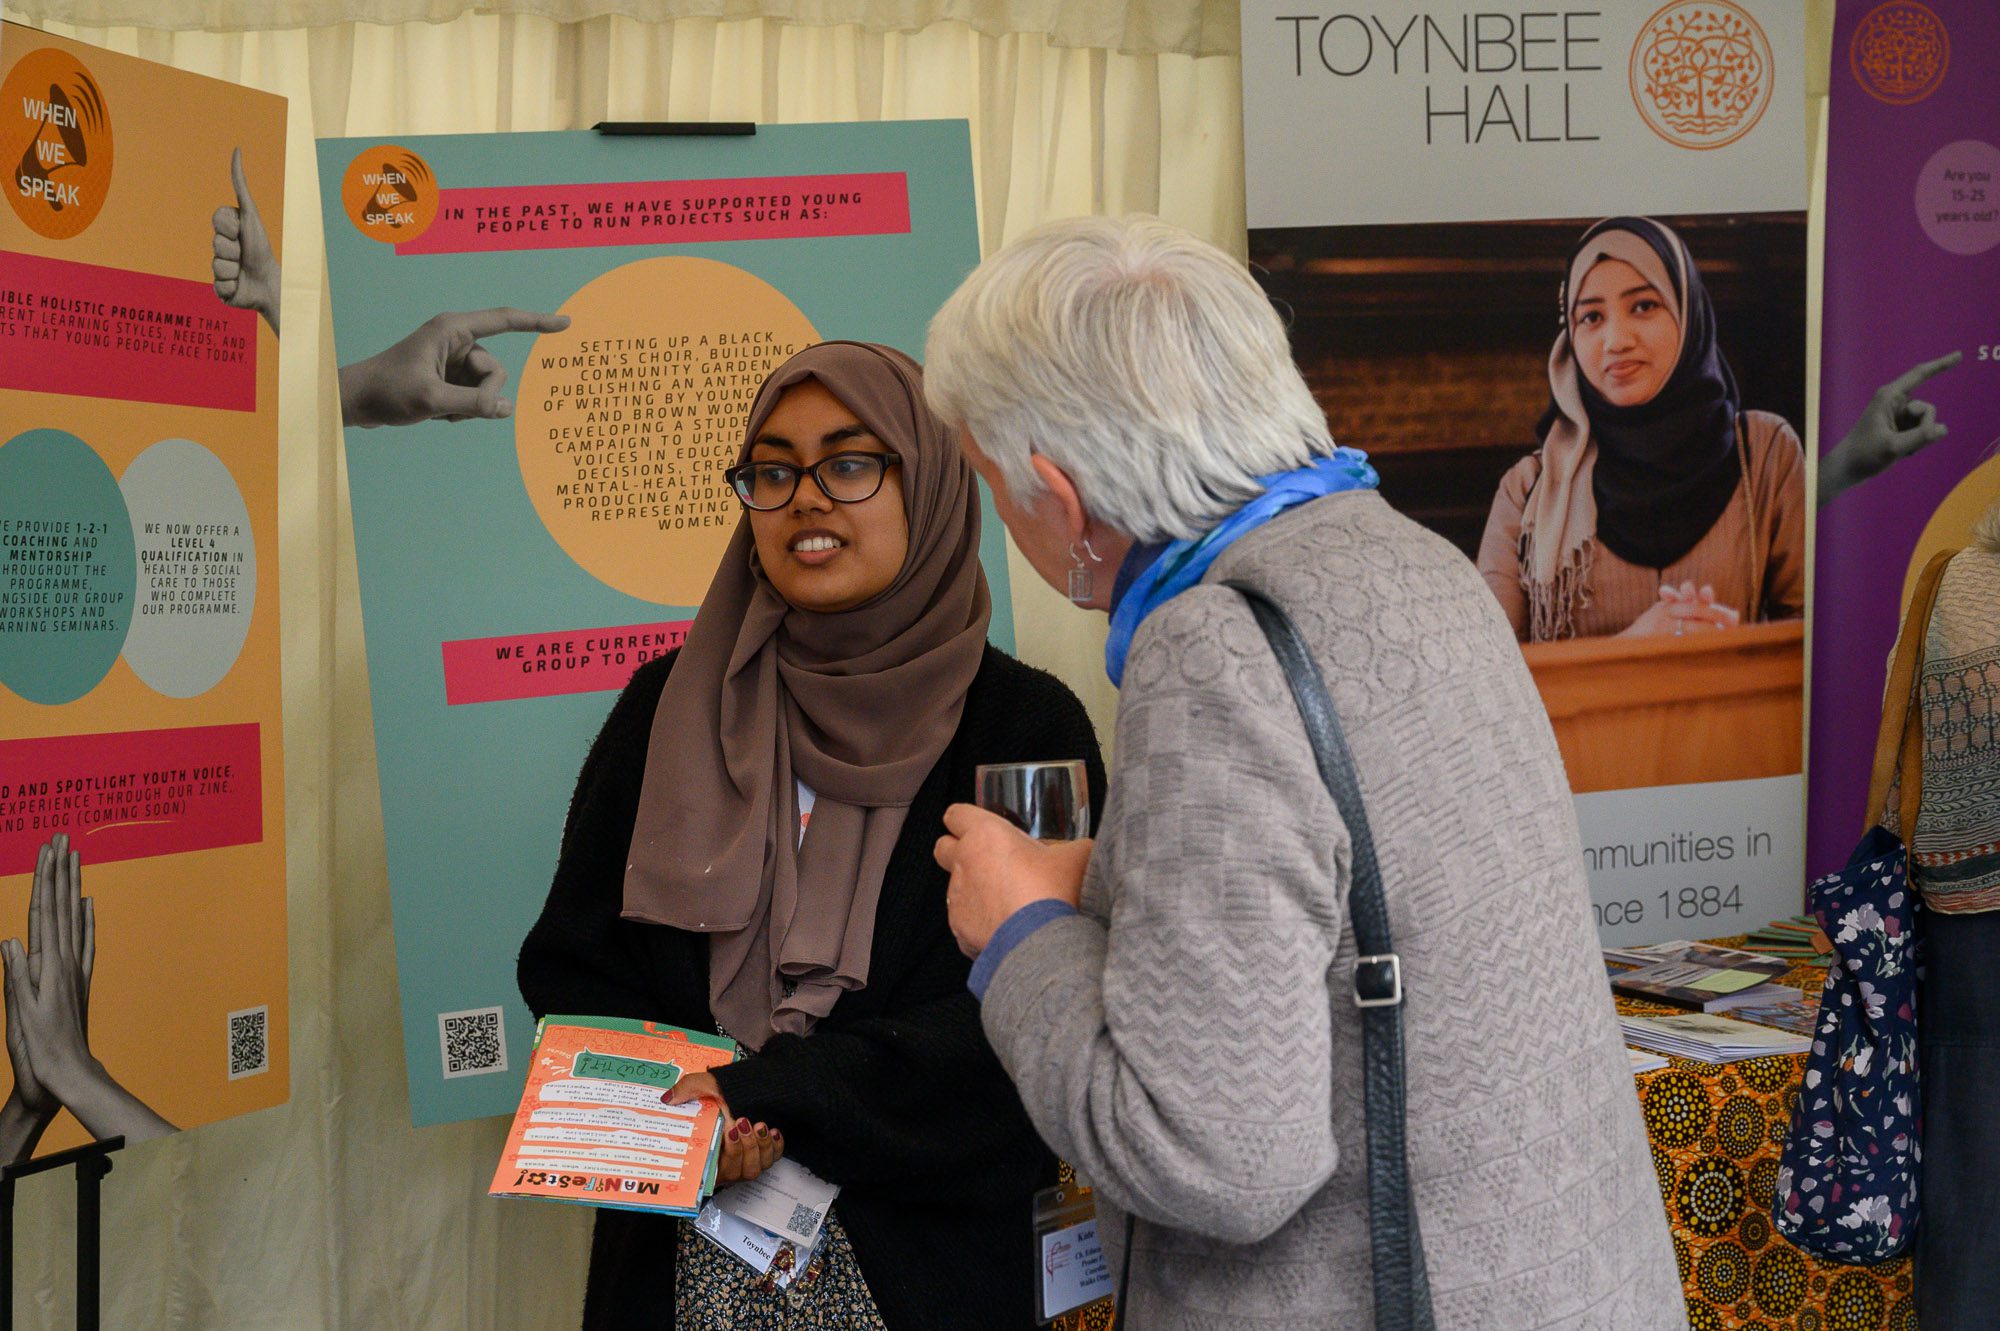 Toynbee Hall youth project worker talks to attendee at Proms at St Jude's Festival